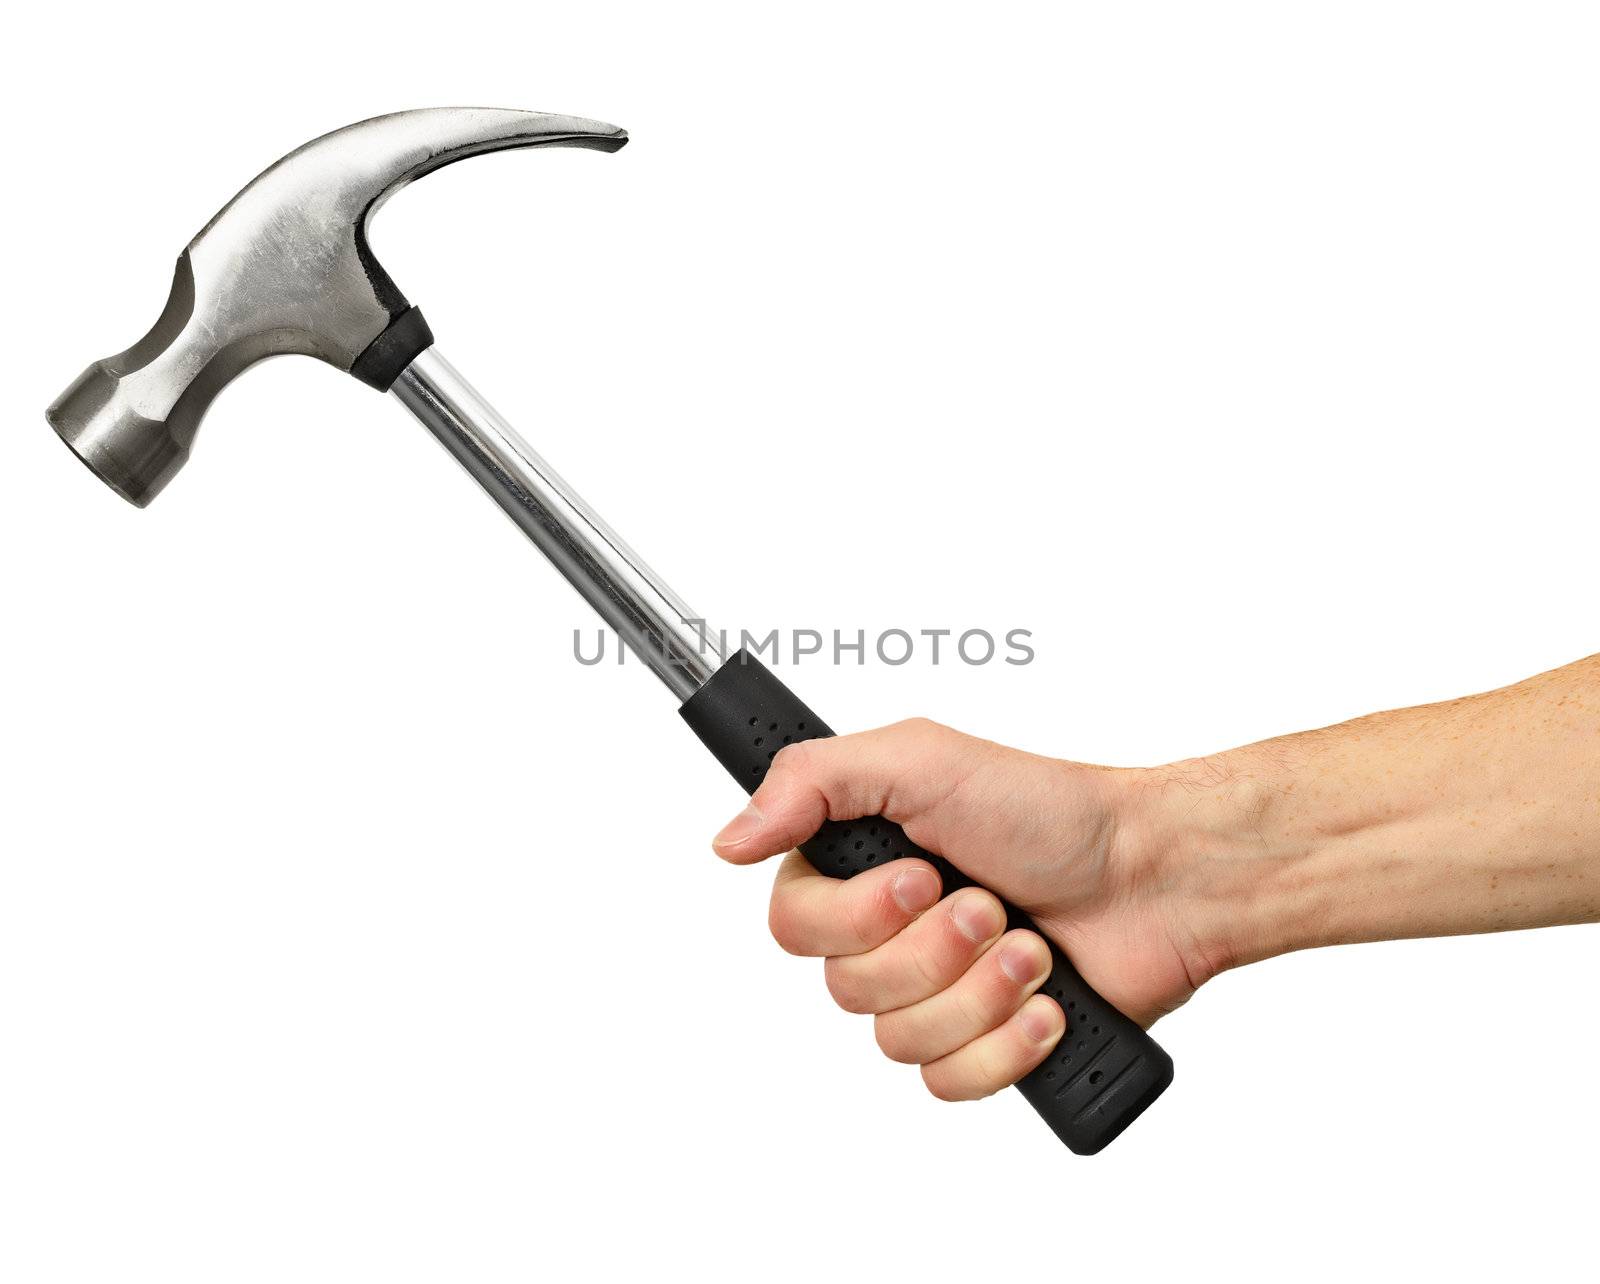 Hammer in hand on white background by pzaxe